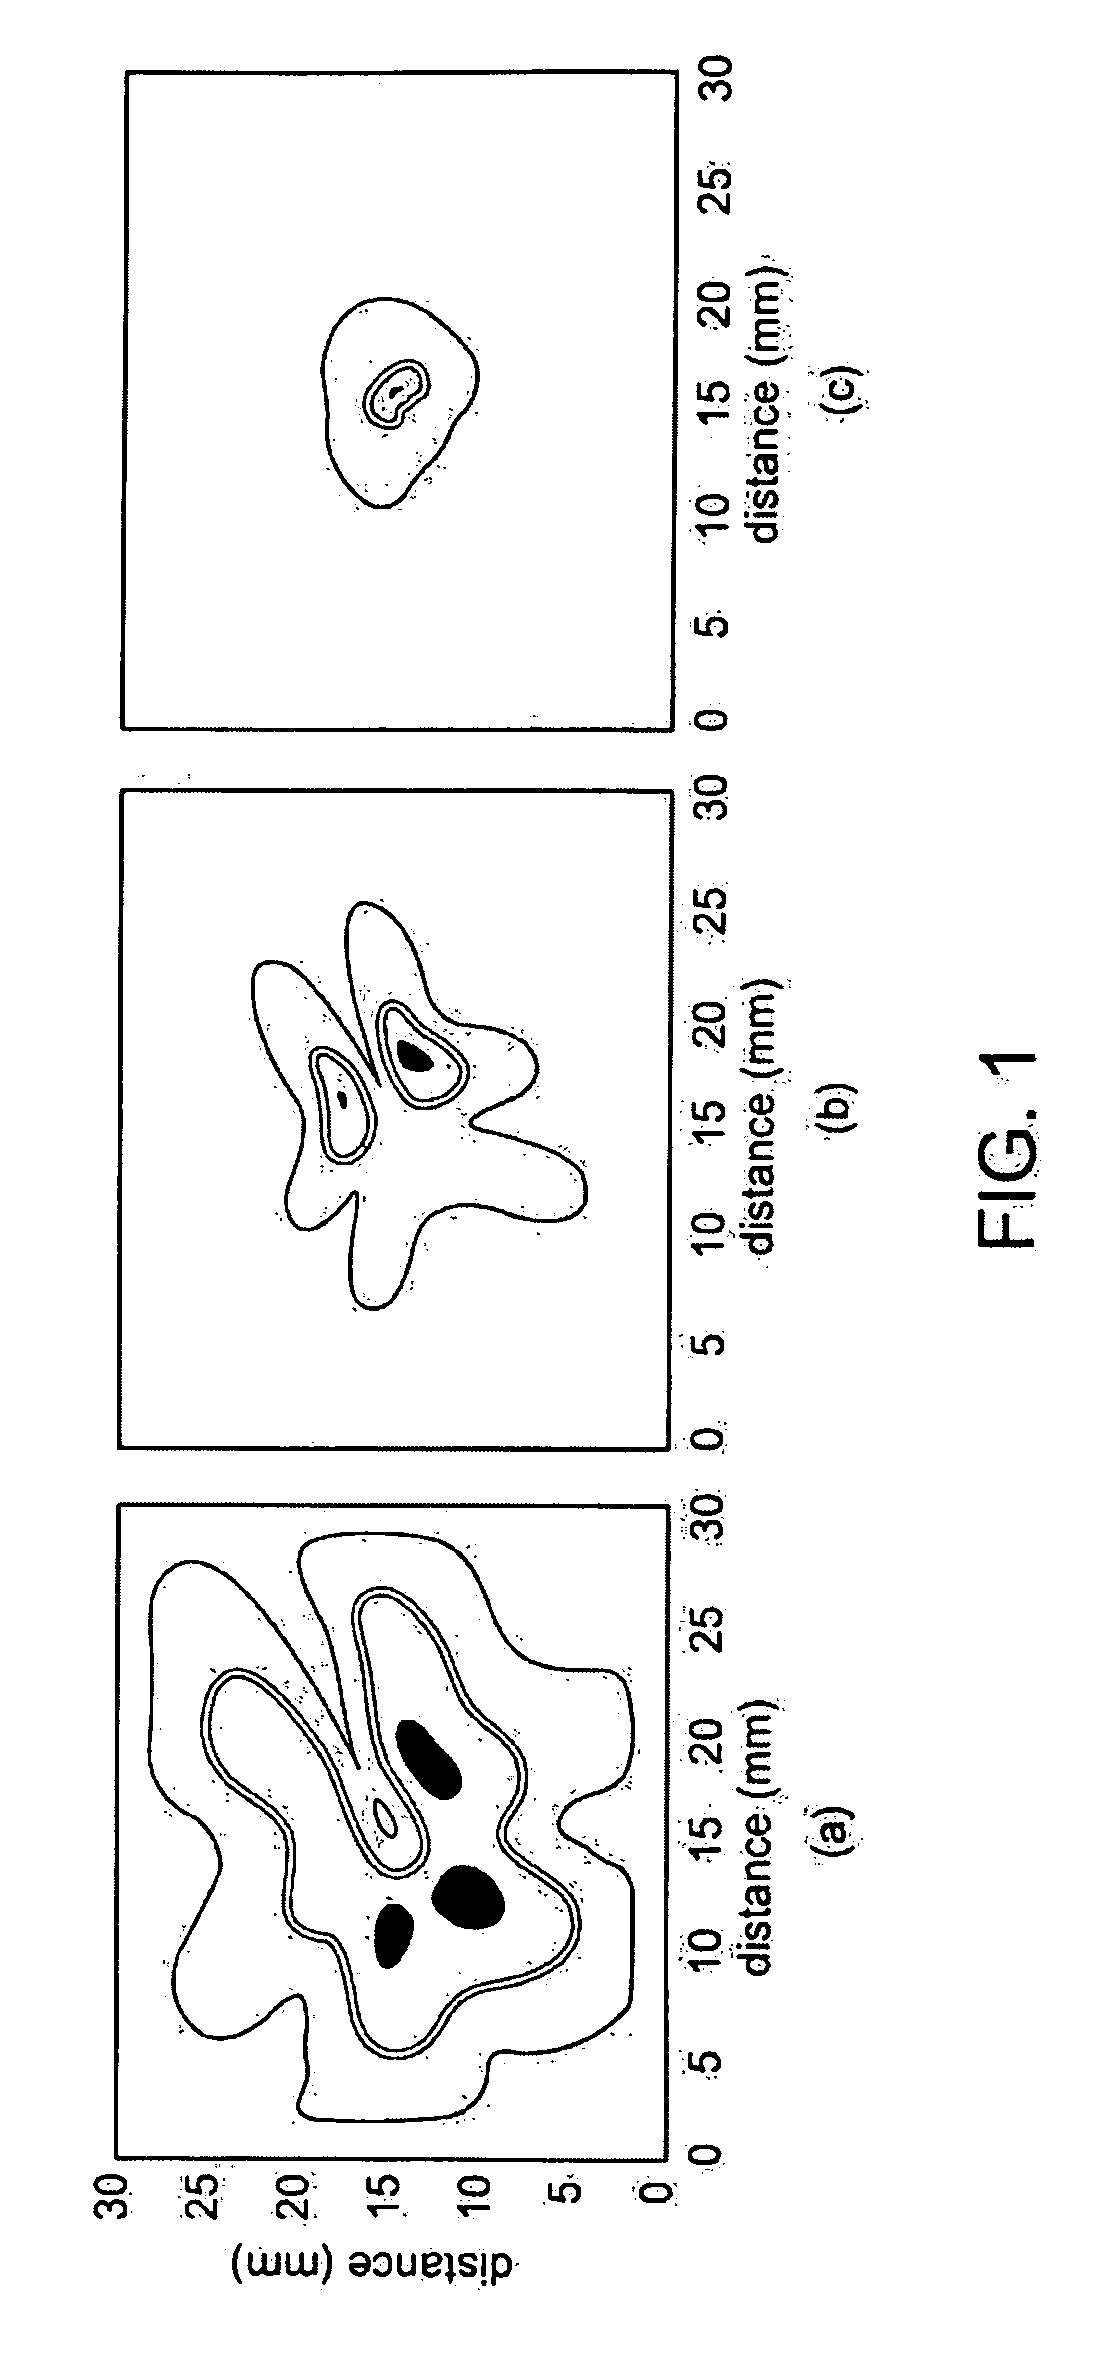 Thermal Ablation Design and Planning Methods